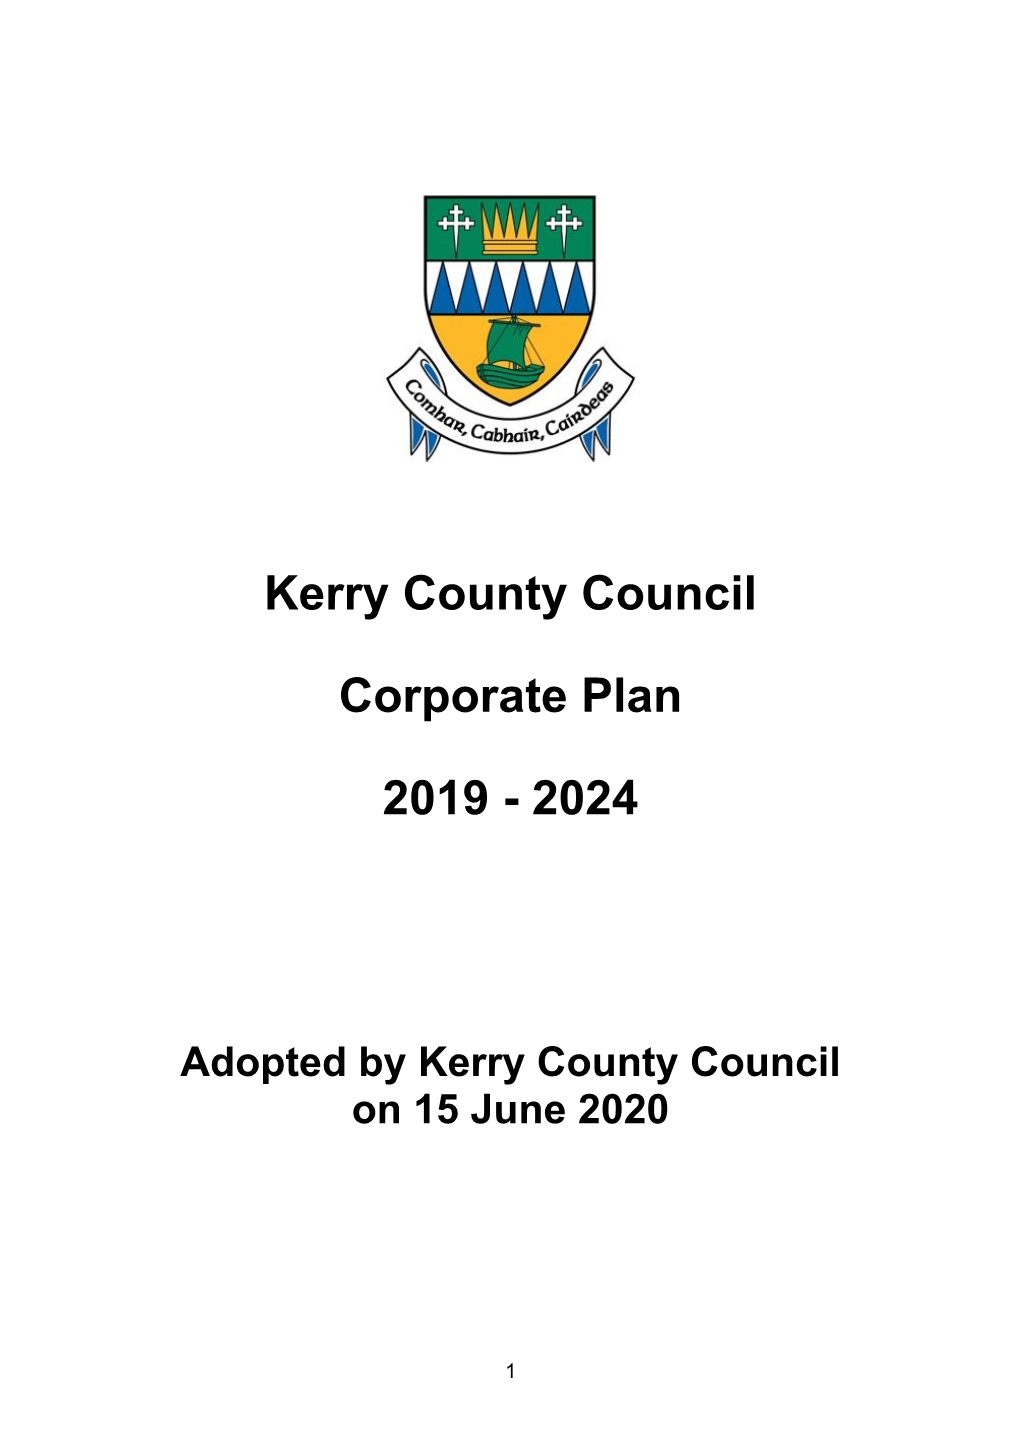 Kerry County Council Corporate Plan 2019-2024